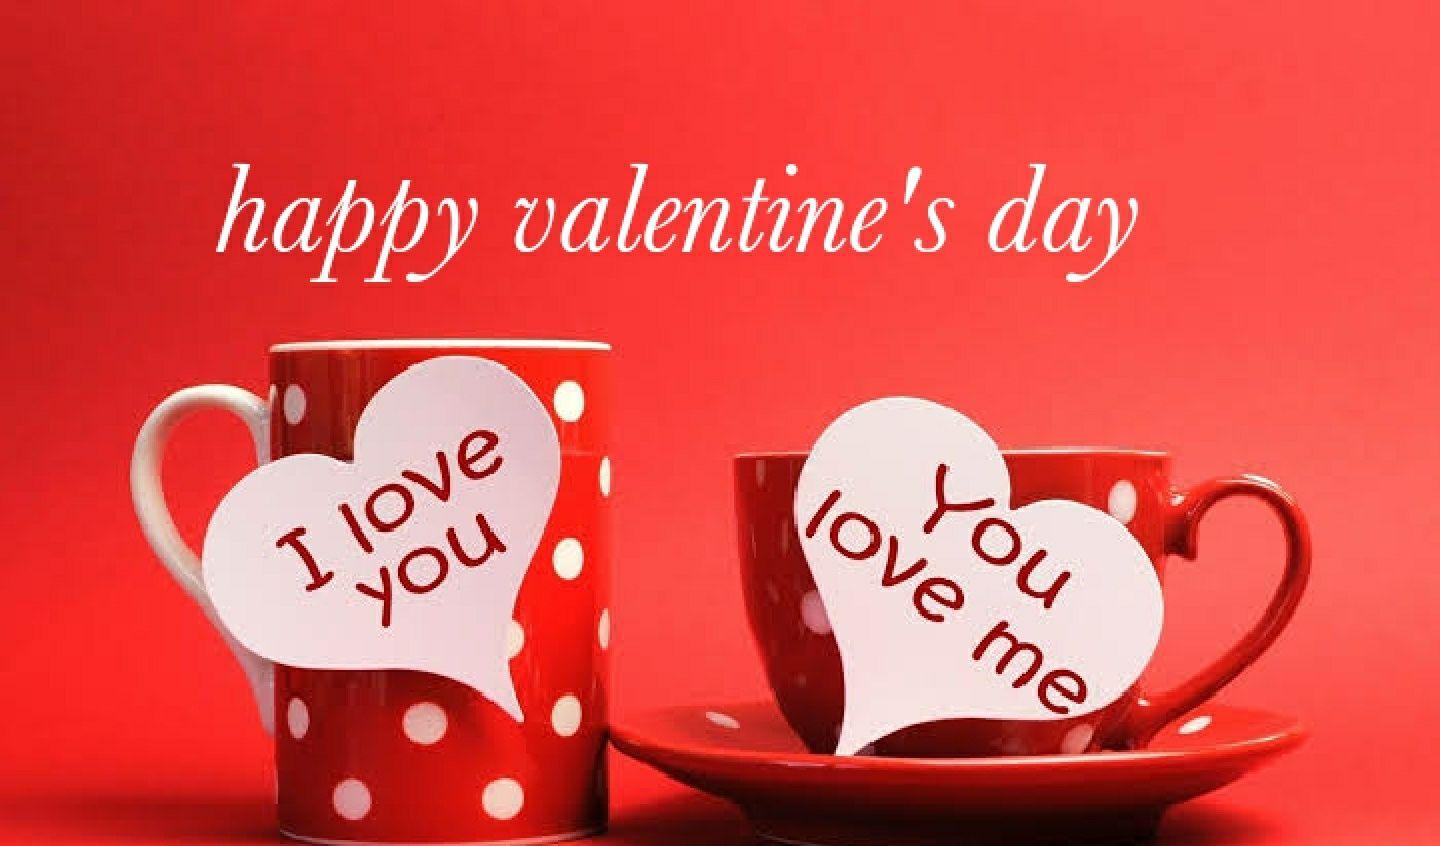 How to Download Valentines day image and wallpaper 2019